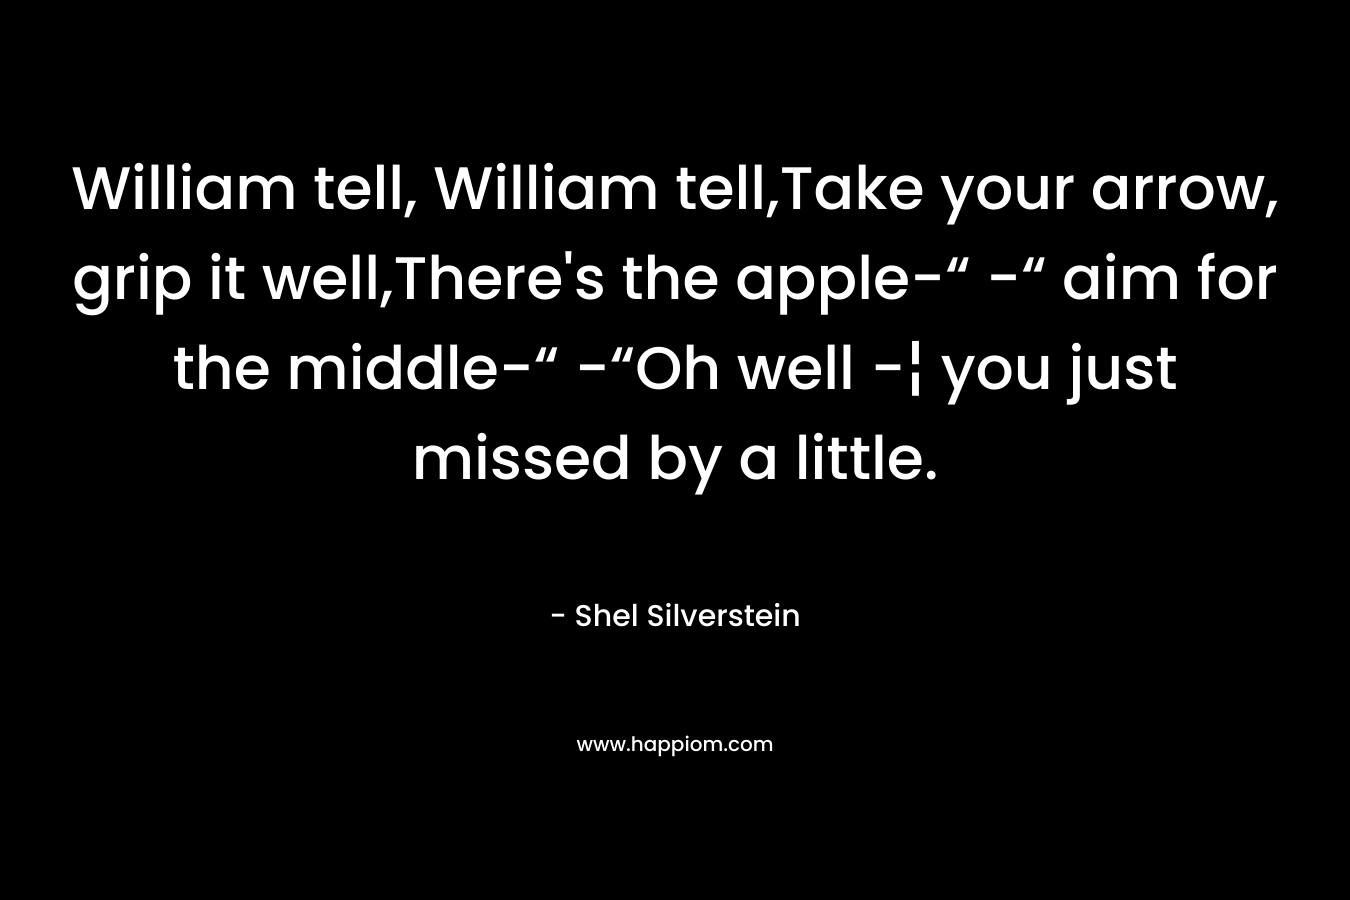 William tell, William tell,Take your arrow, grip it well,There’s the apple-“ -“ aim for the middle-“ -“Oh well -¦ you just missed by a little. – Shel Silverstein